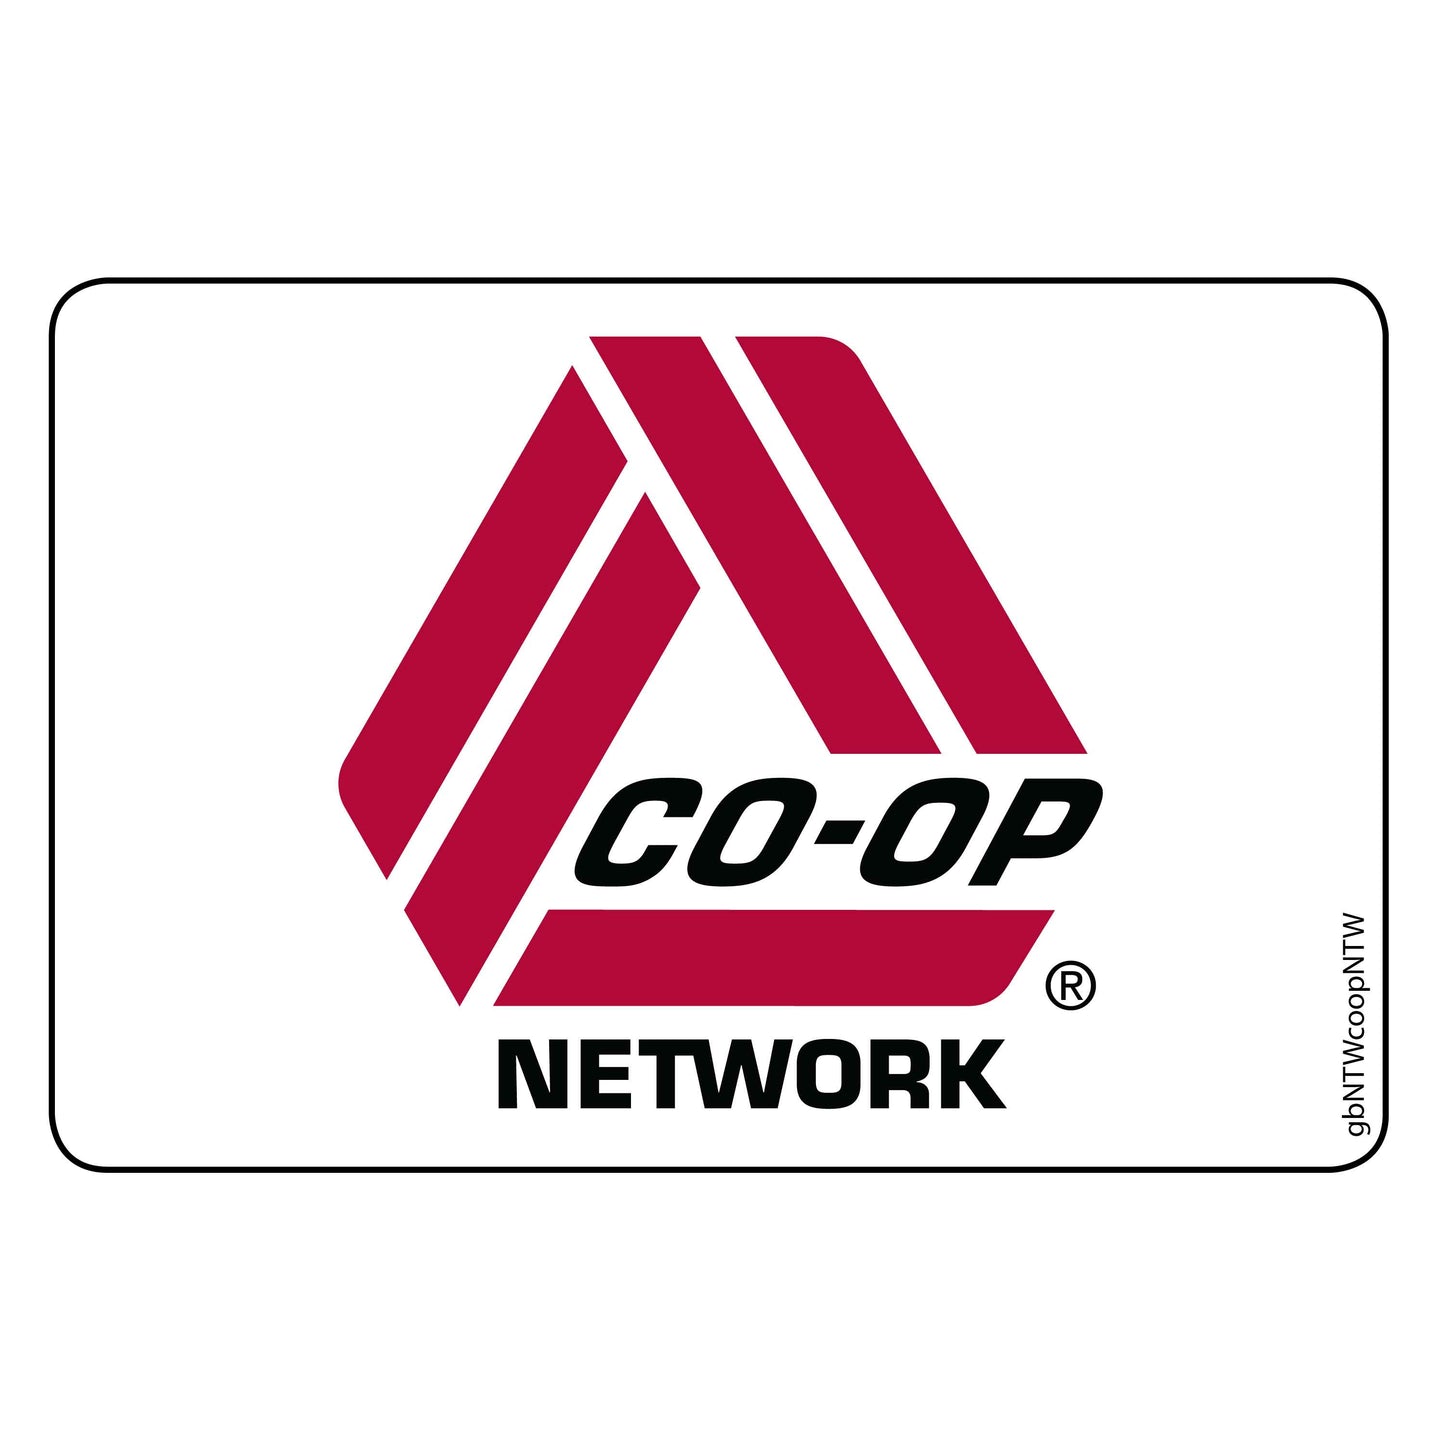 Single Network Decal, Co-op Network. 3 inches by 2 inches in size.